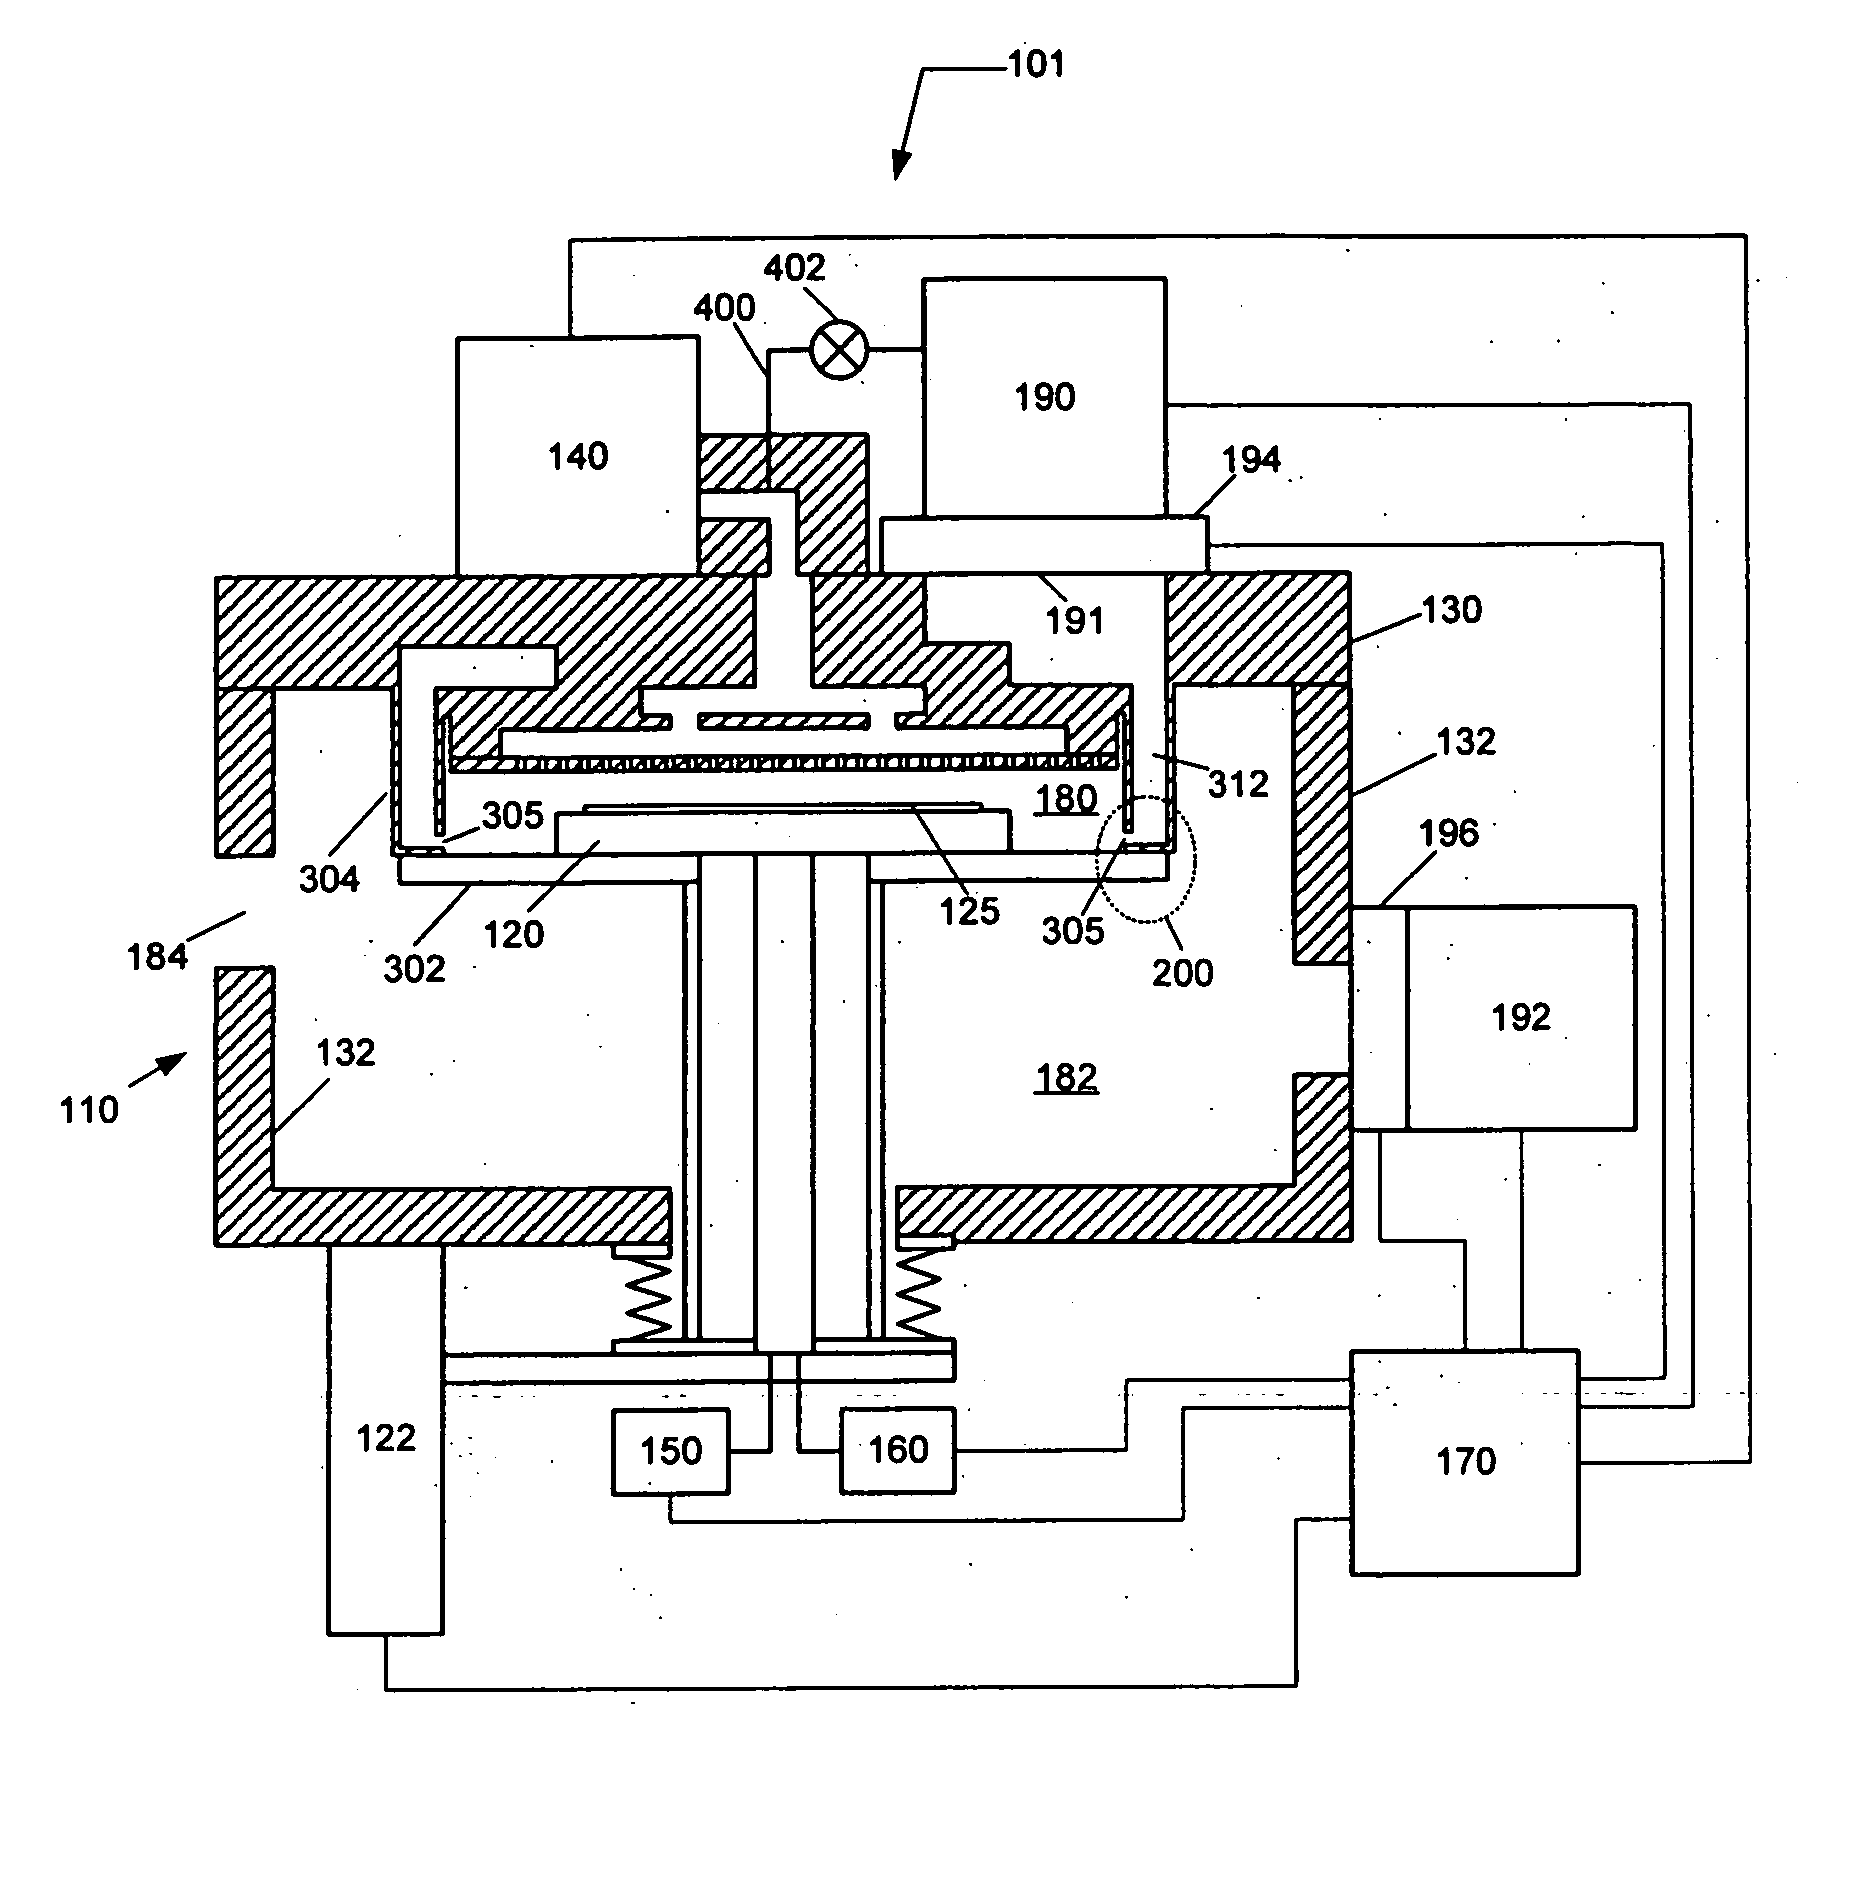 Exhaust system for a vacuum processing system